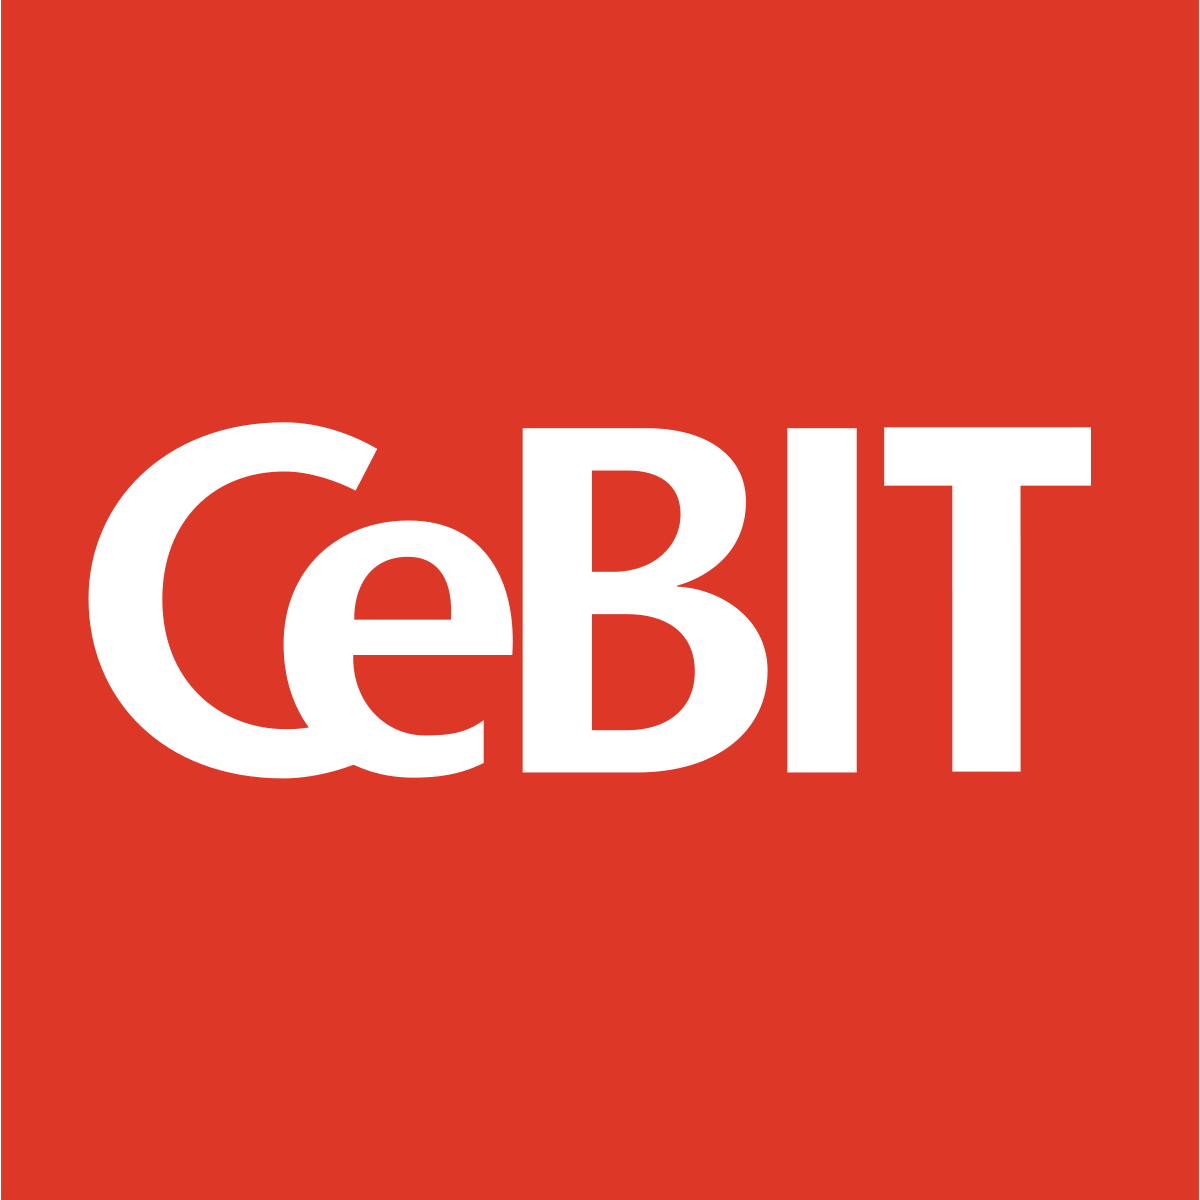 The boundaries between humans and technology are blurring: we visited CeBIT 2017